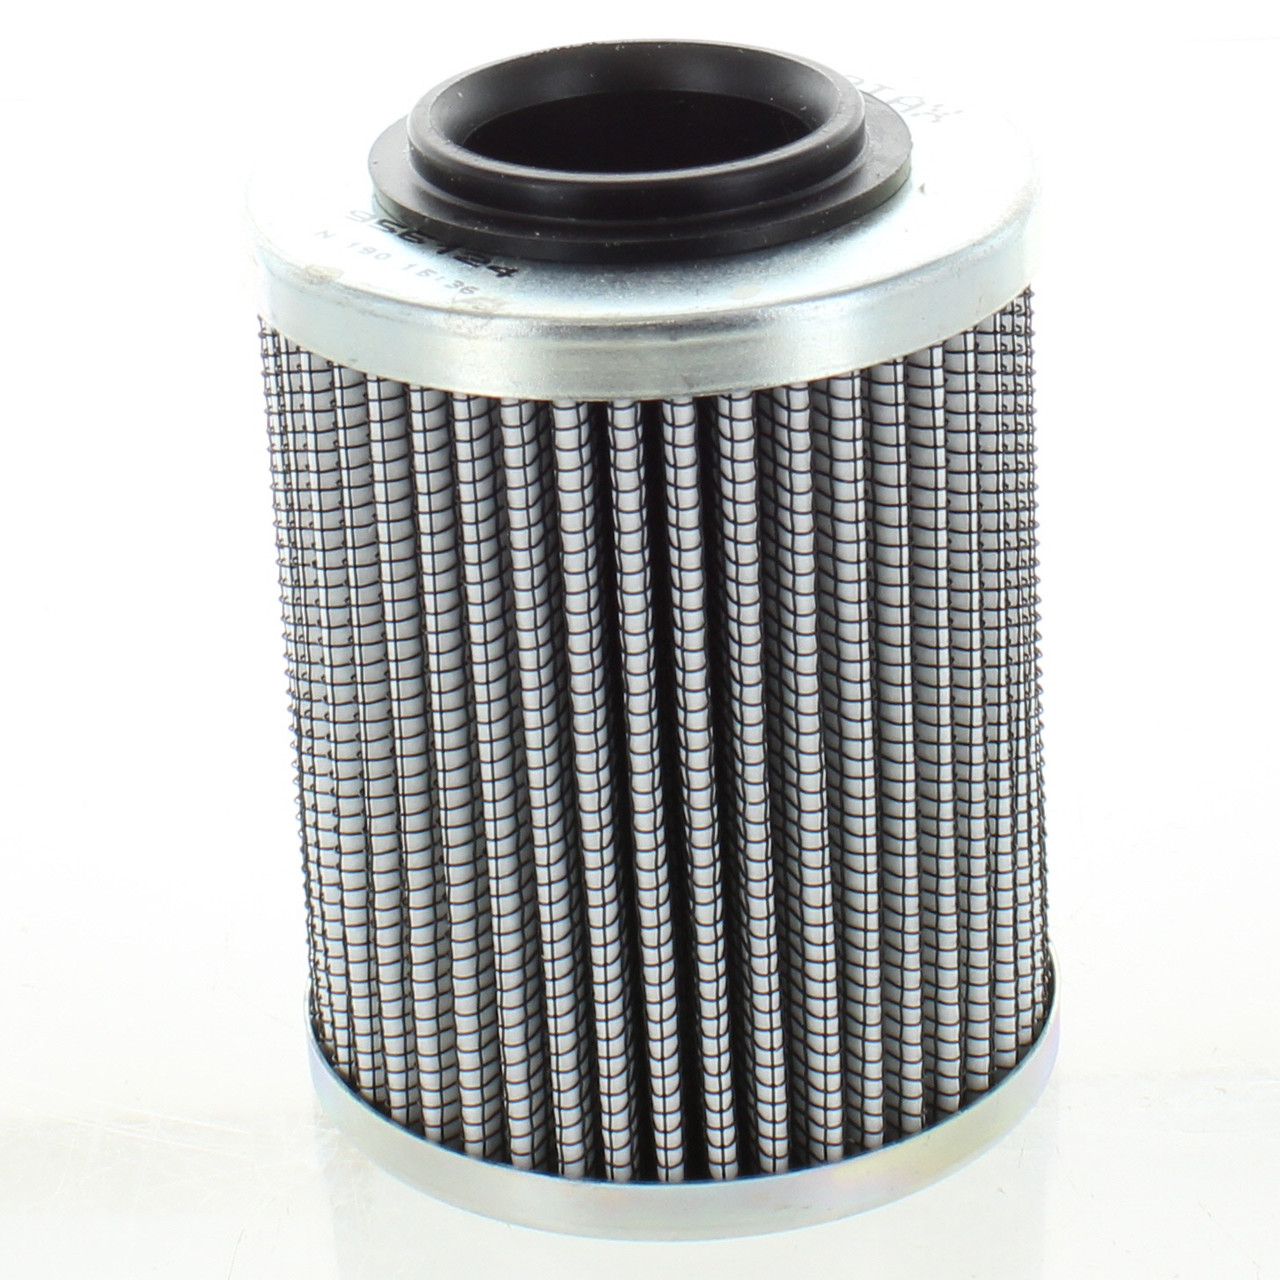 Ski-Doo New OEM Oil Filter for 900 ACE and 900 ACE Turbo Models, 420956124